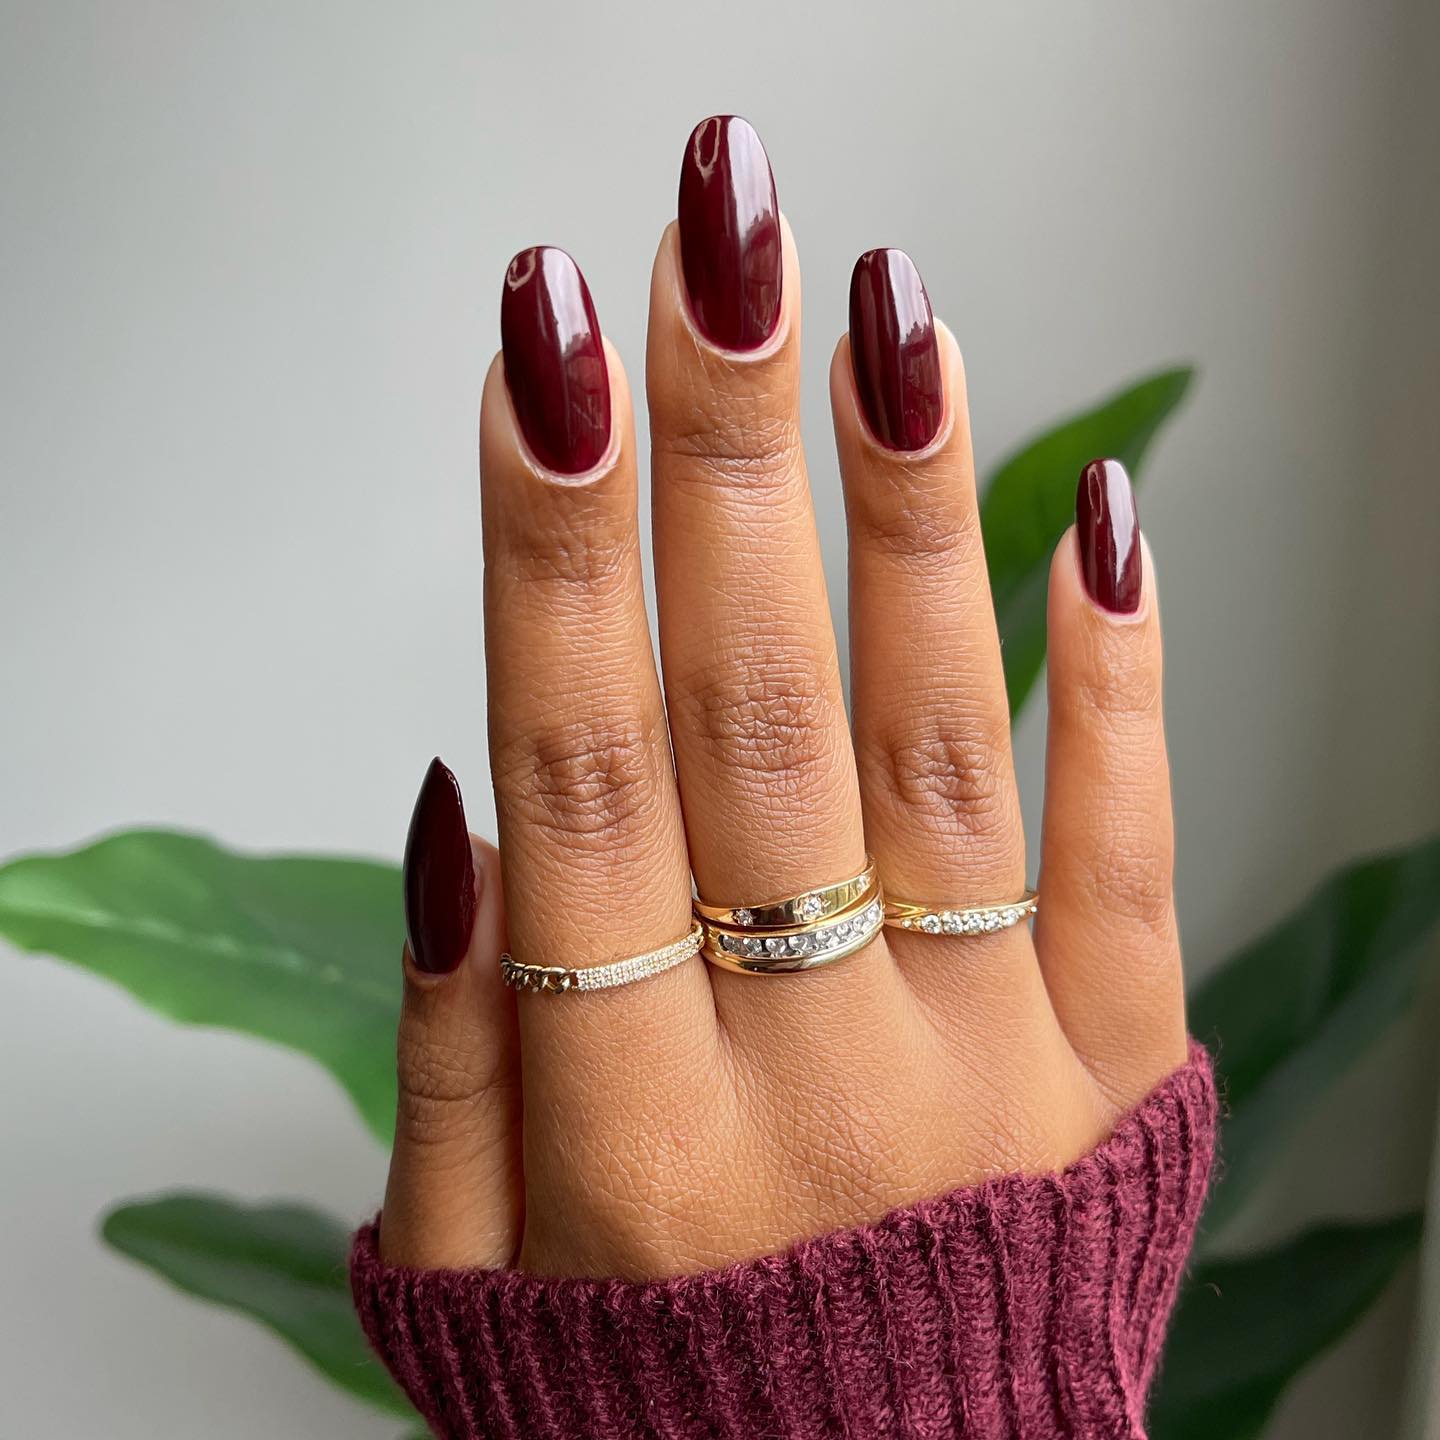 Red-Wine Coffin Nails